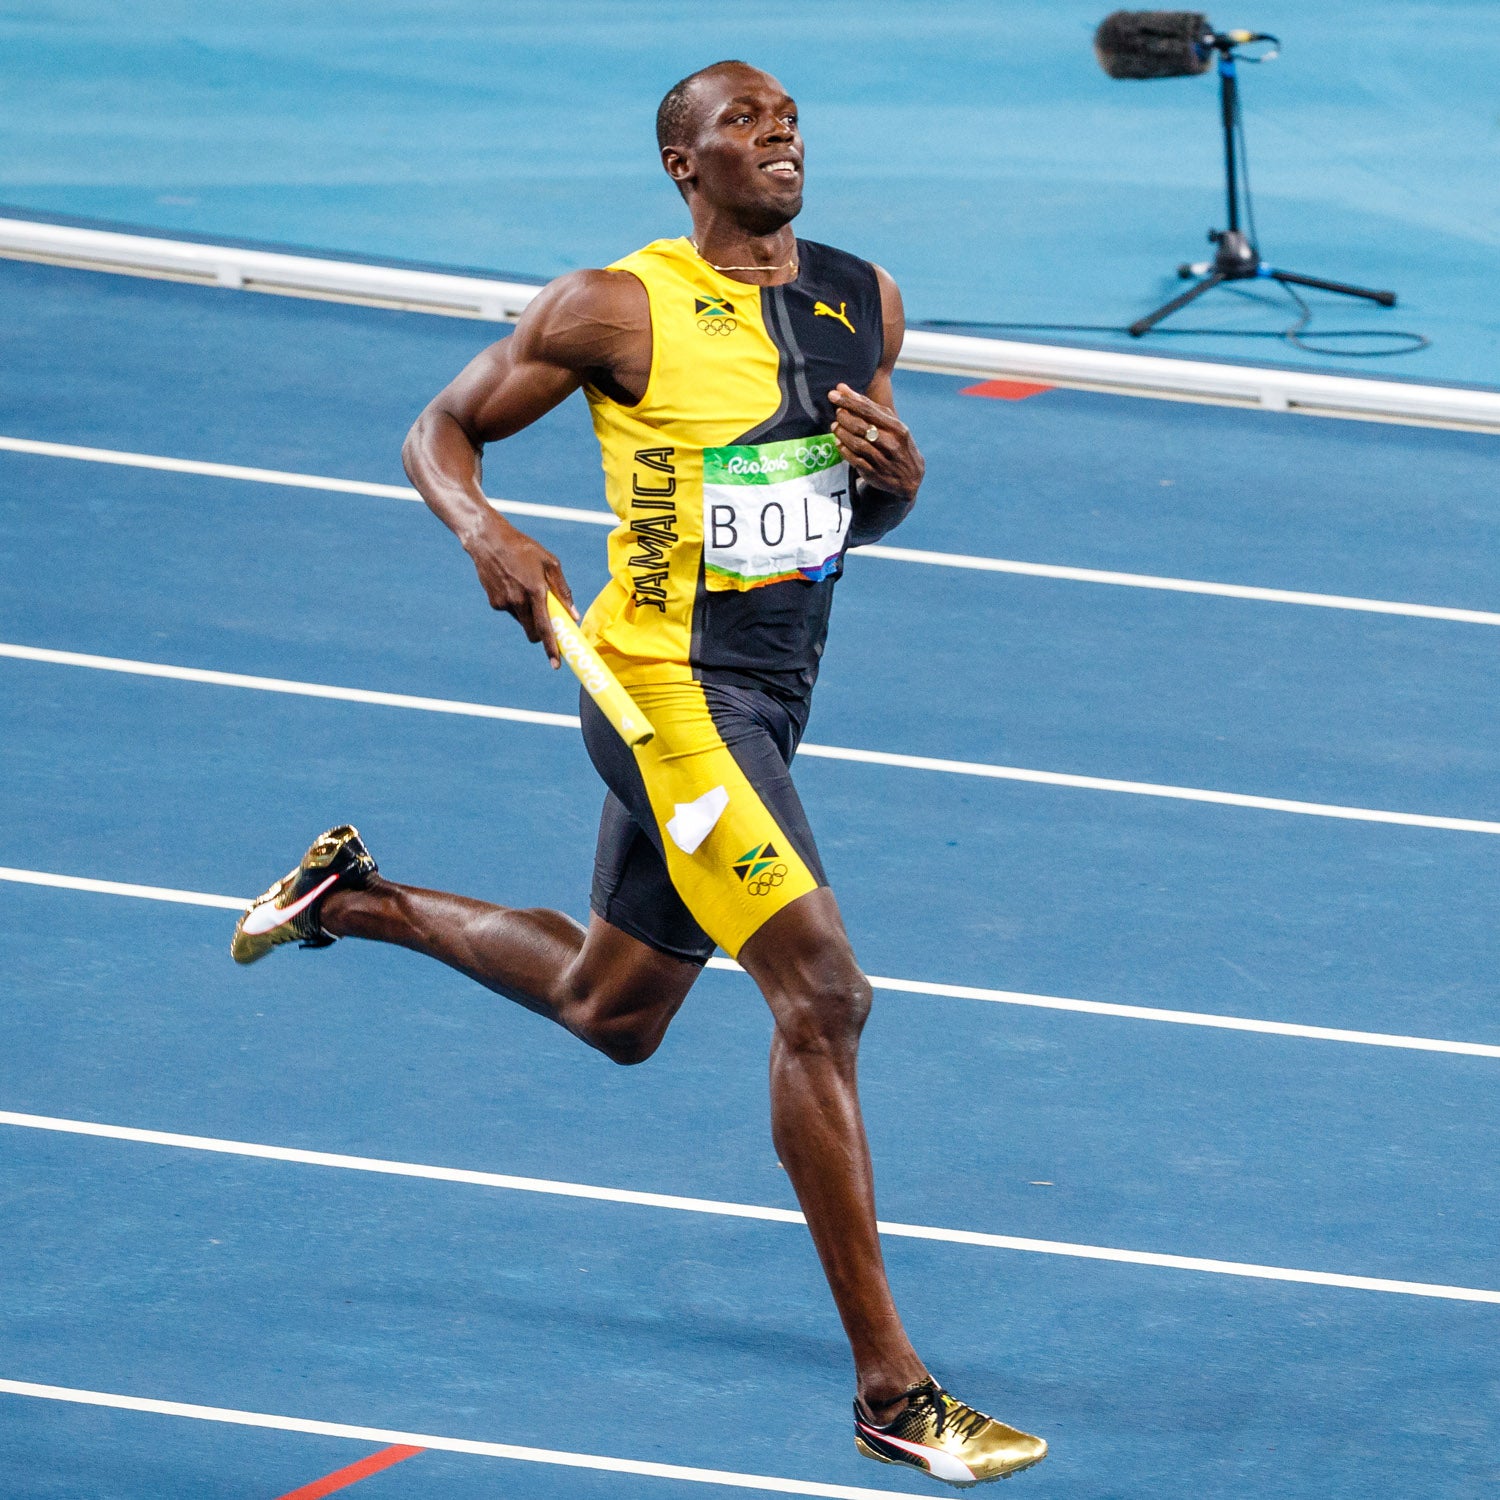 How Did Usain Bolt Train To Become Fastest Man On Earth?